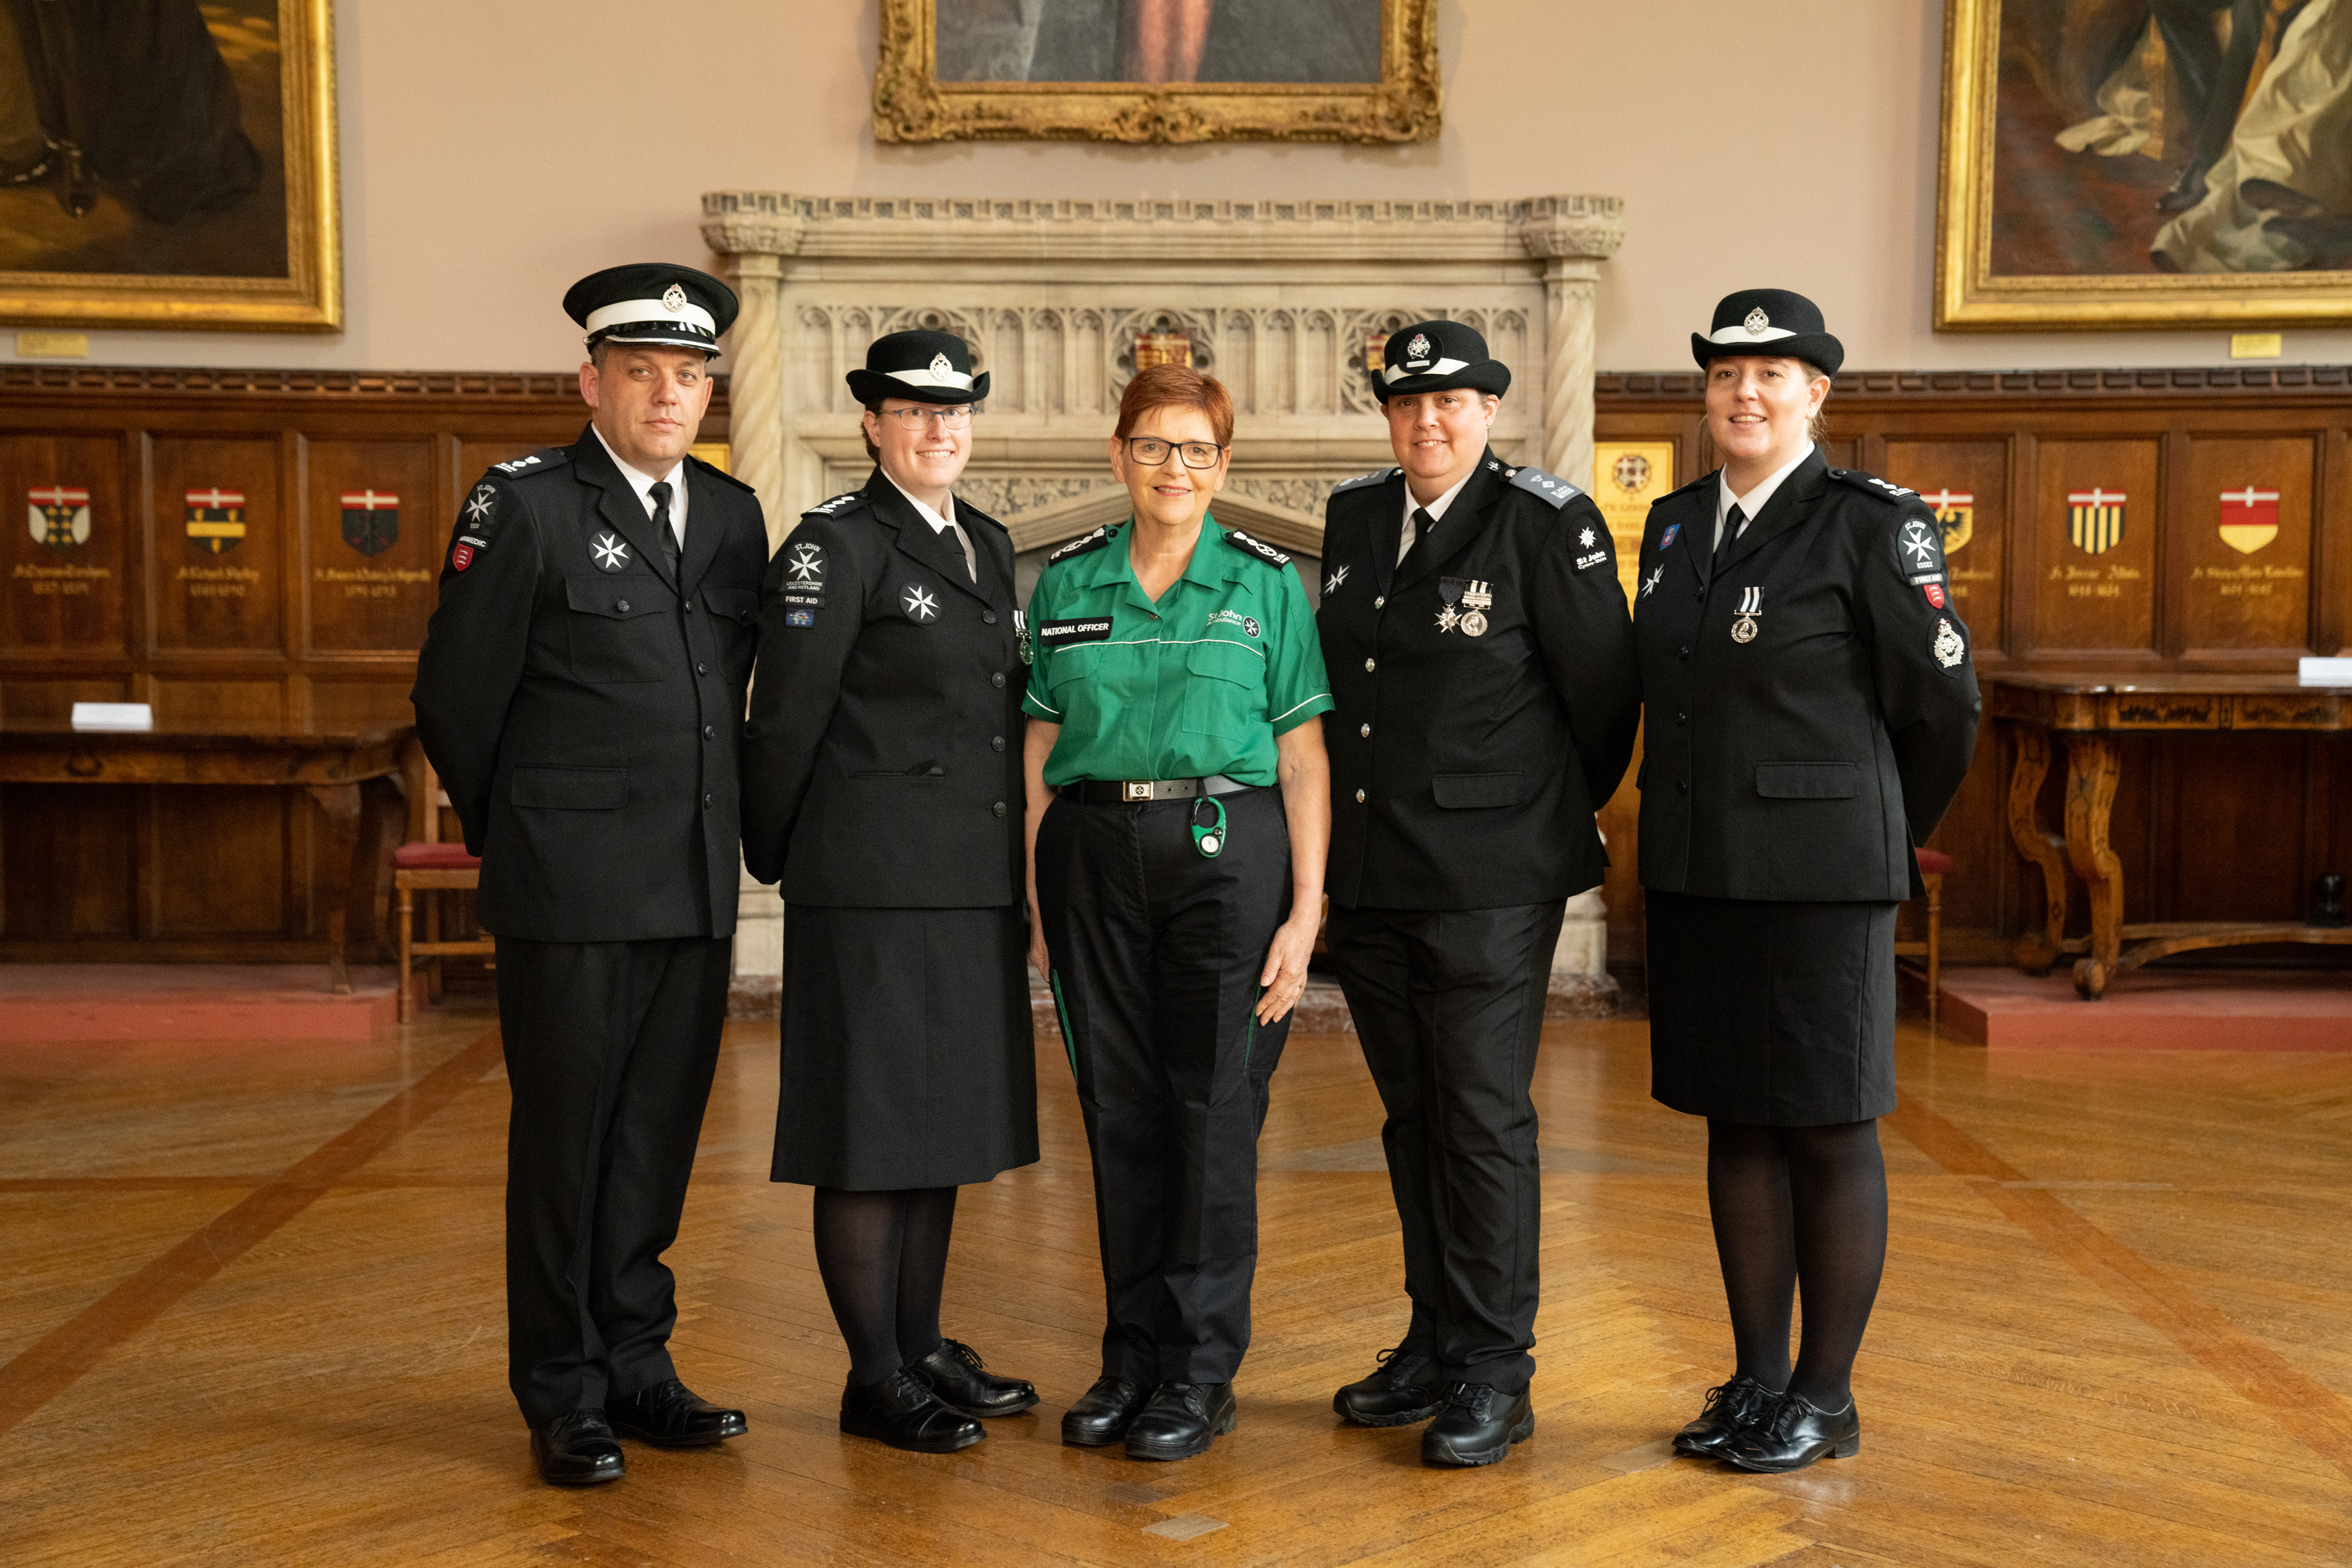 Volunteers Lee Devall and Diana Martin, St John Ambulance’s chief commissioner Ann Cable with volunteers Jane Van-Tiel and Emily Whyte (St Joh